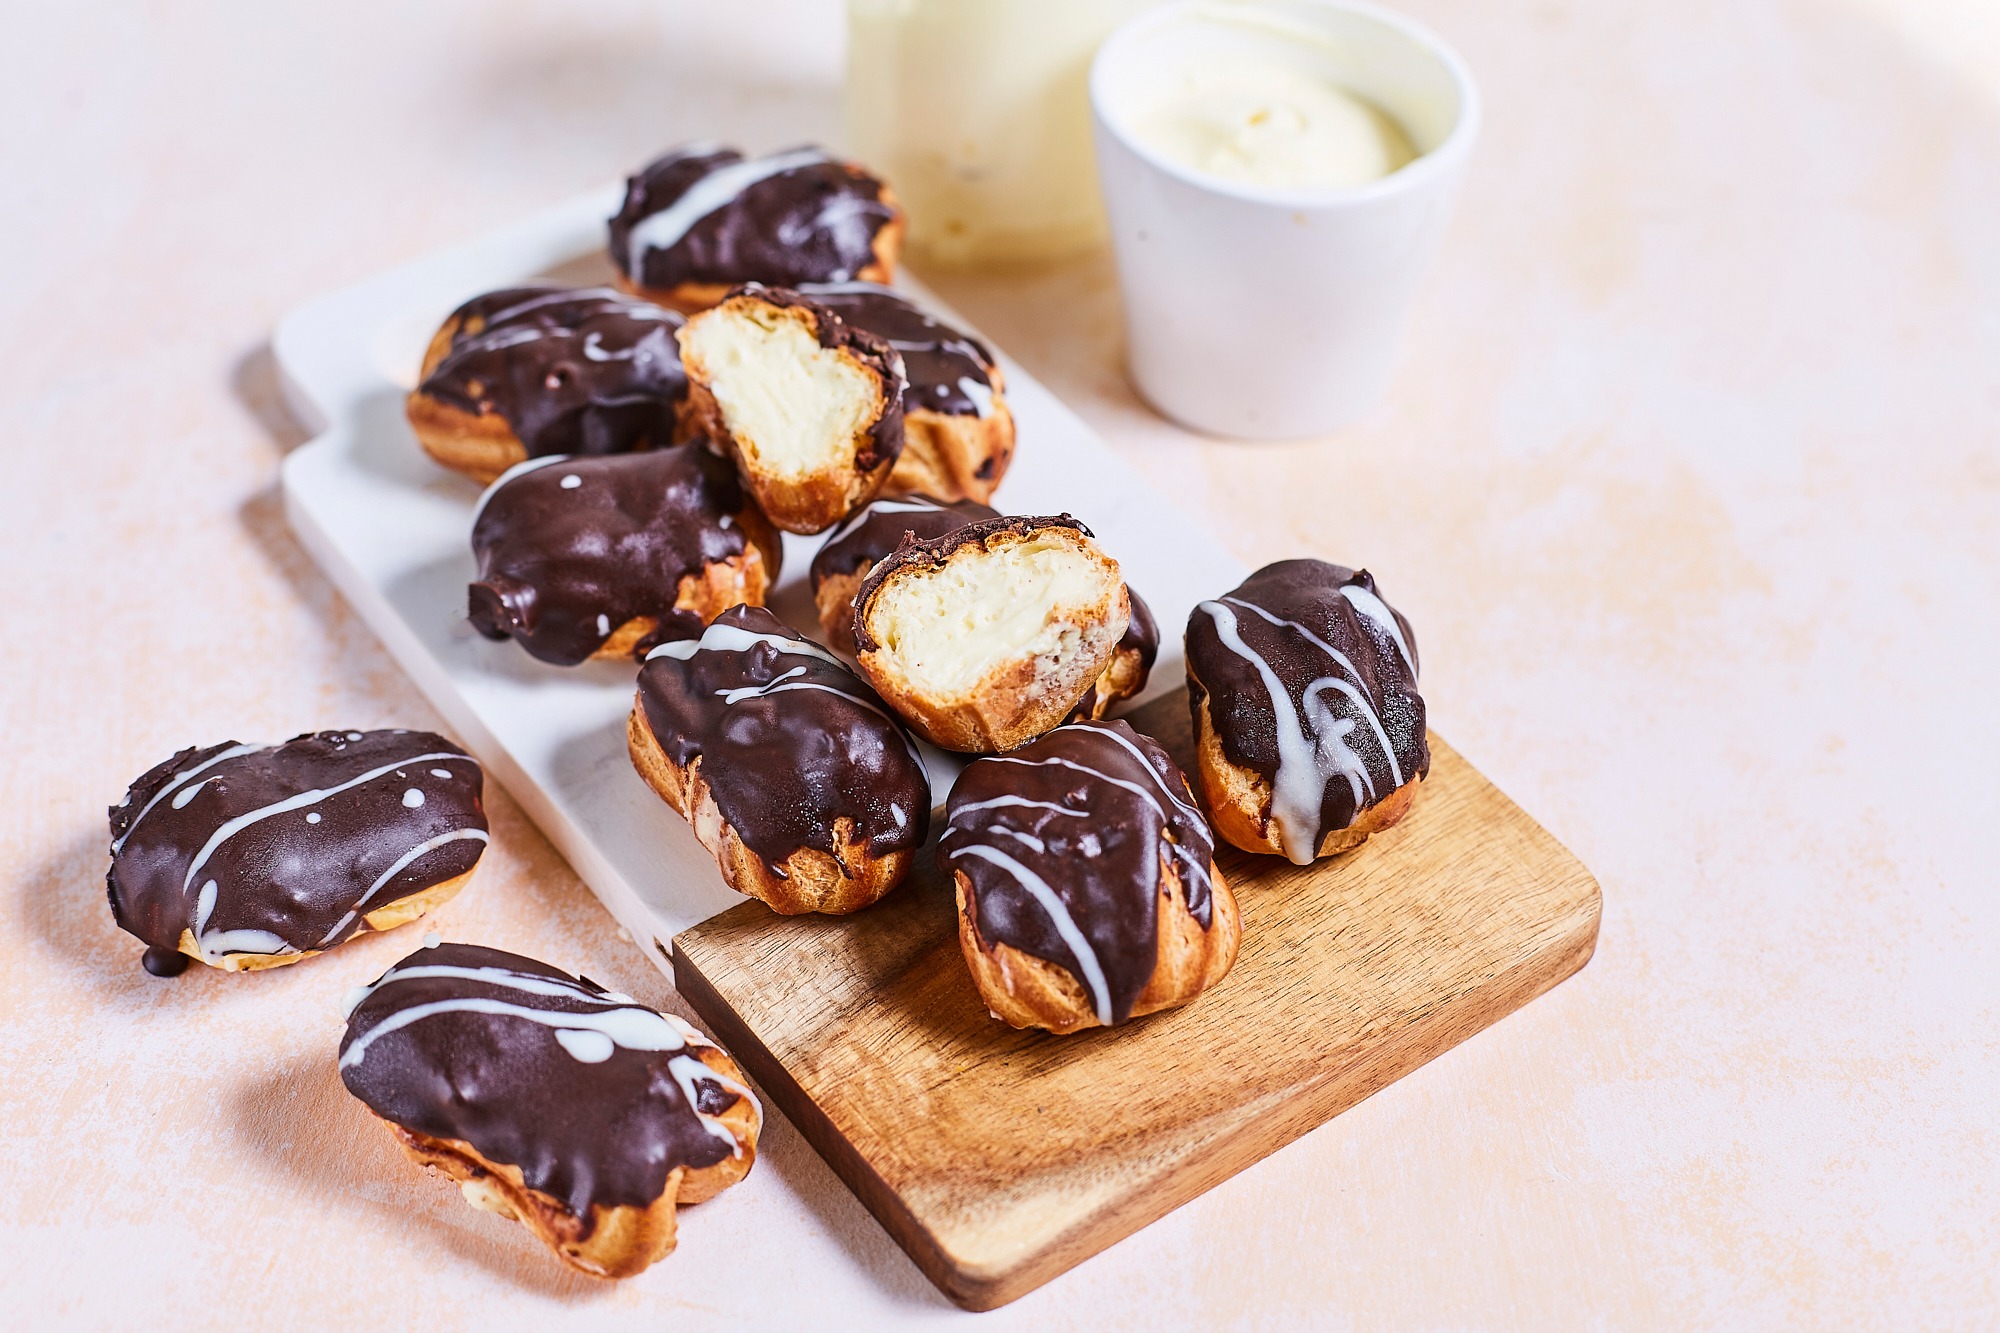 Small eclairs with boiled cream filling